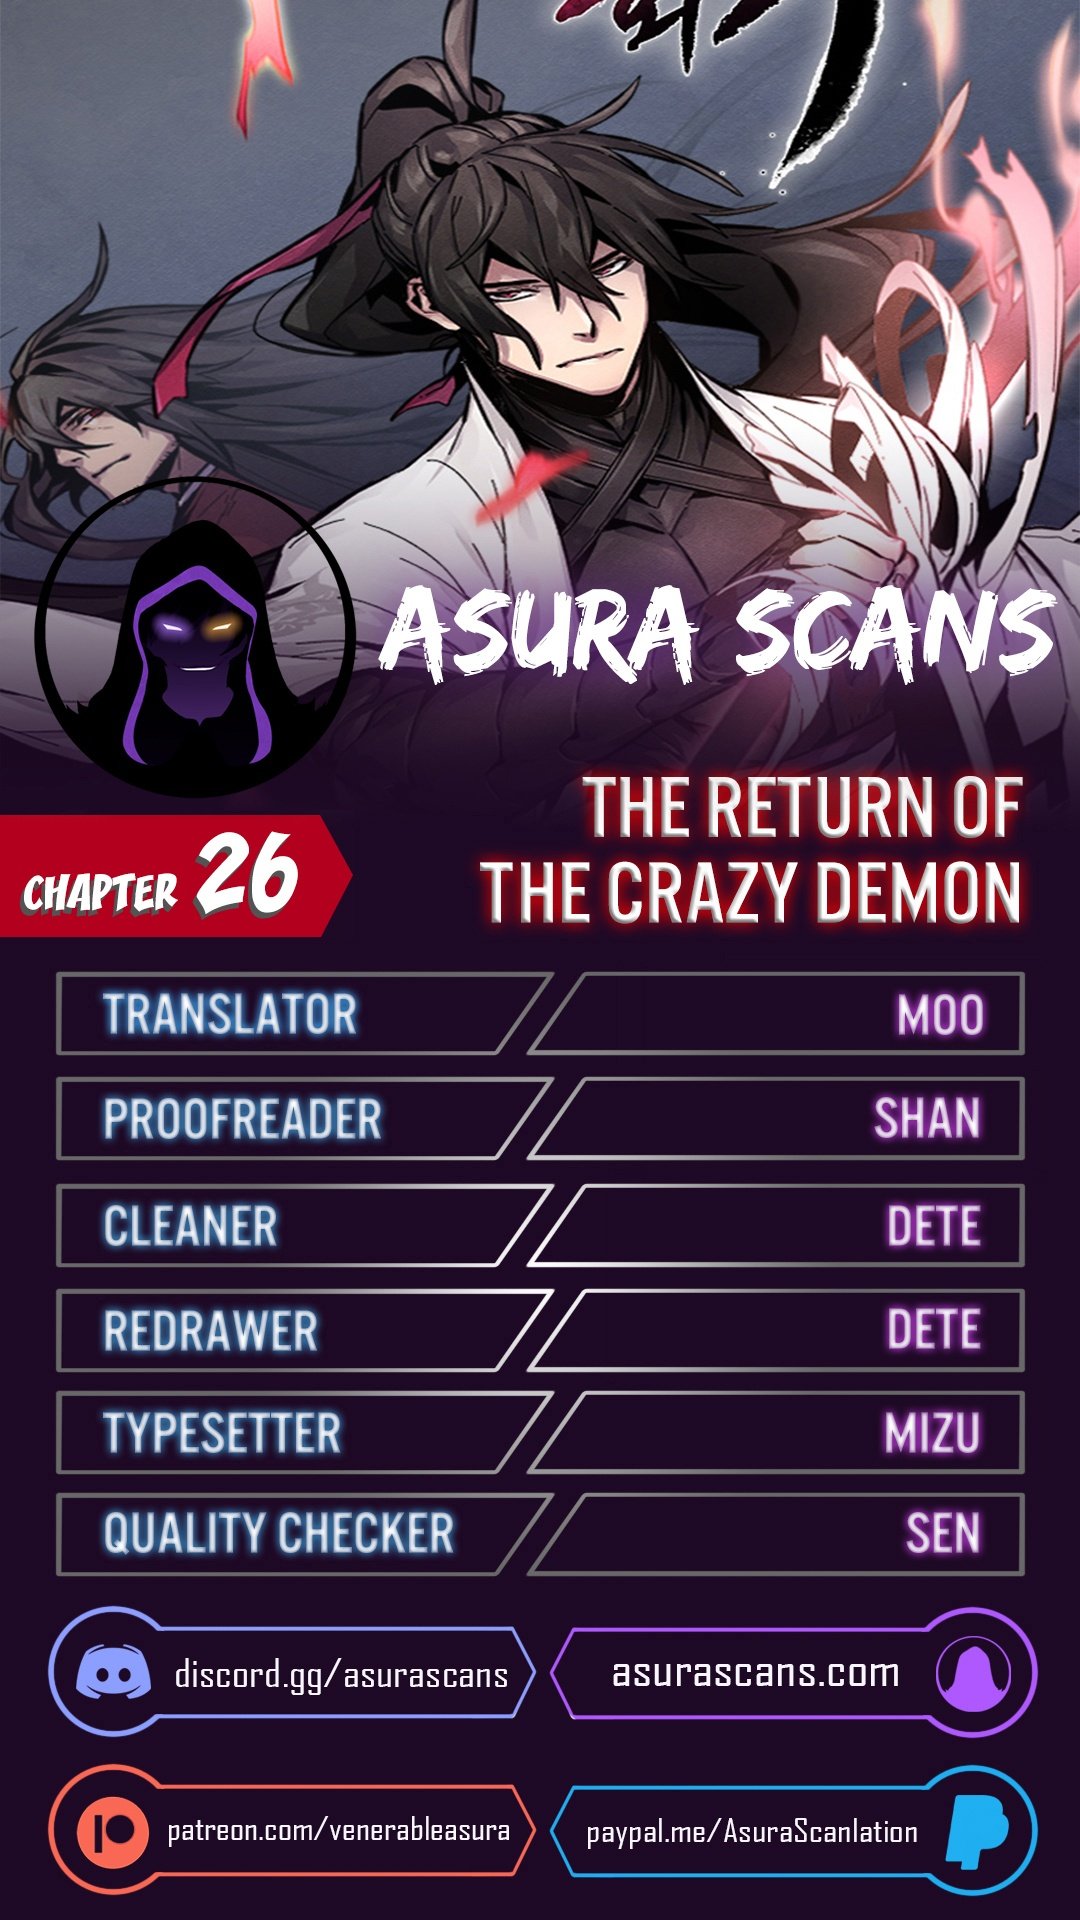 The Return of the Crazy Demon - Chapter 18567 - Image 1